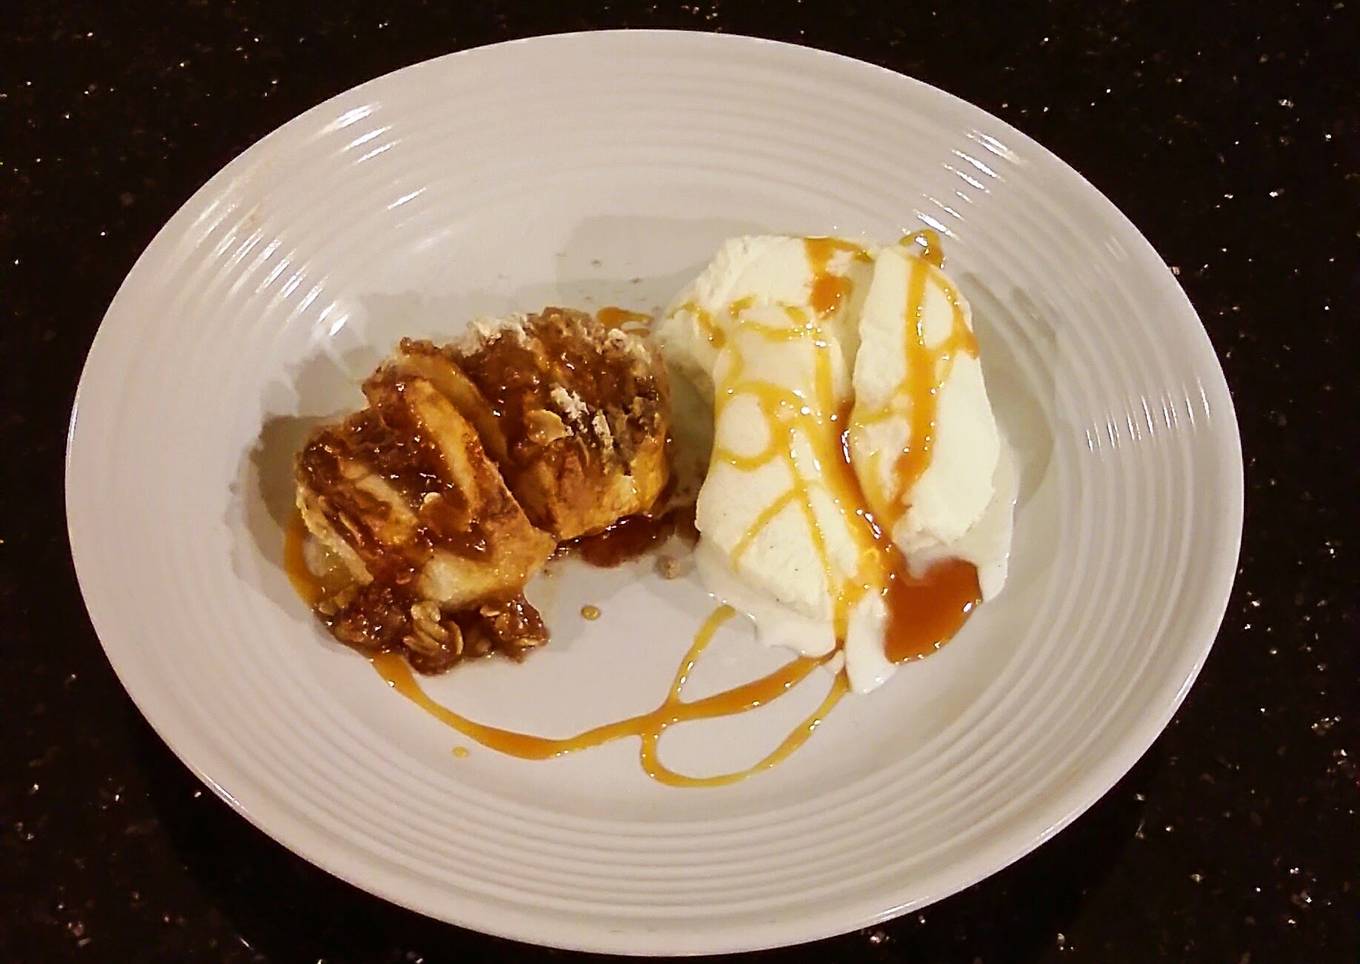 Hasselback Apples with Toffee / Oat Strusel Topping